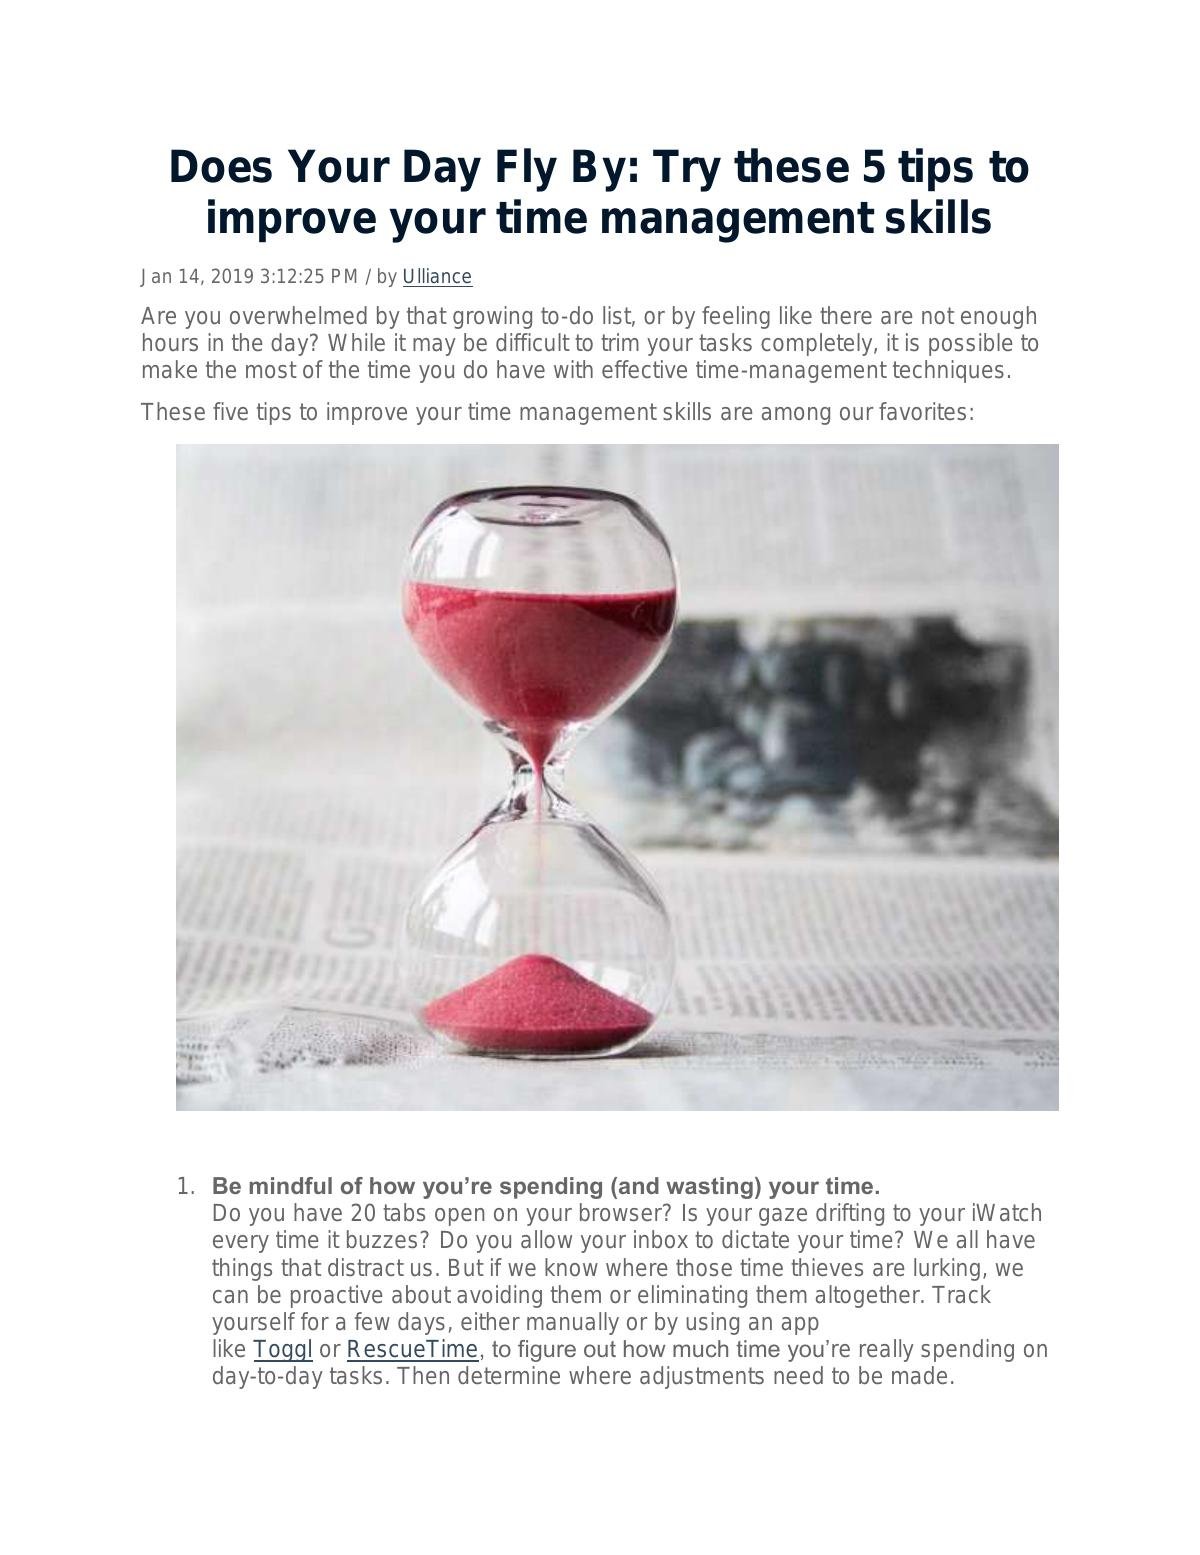 Does Your Day Fly By: Try these 5 tips to improve your time management skills